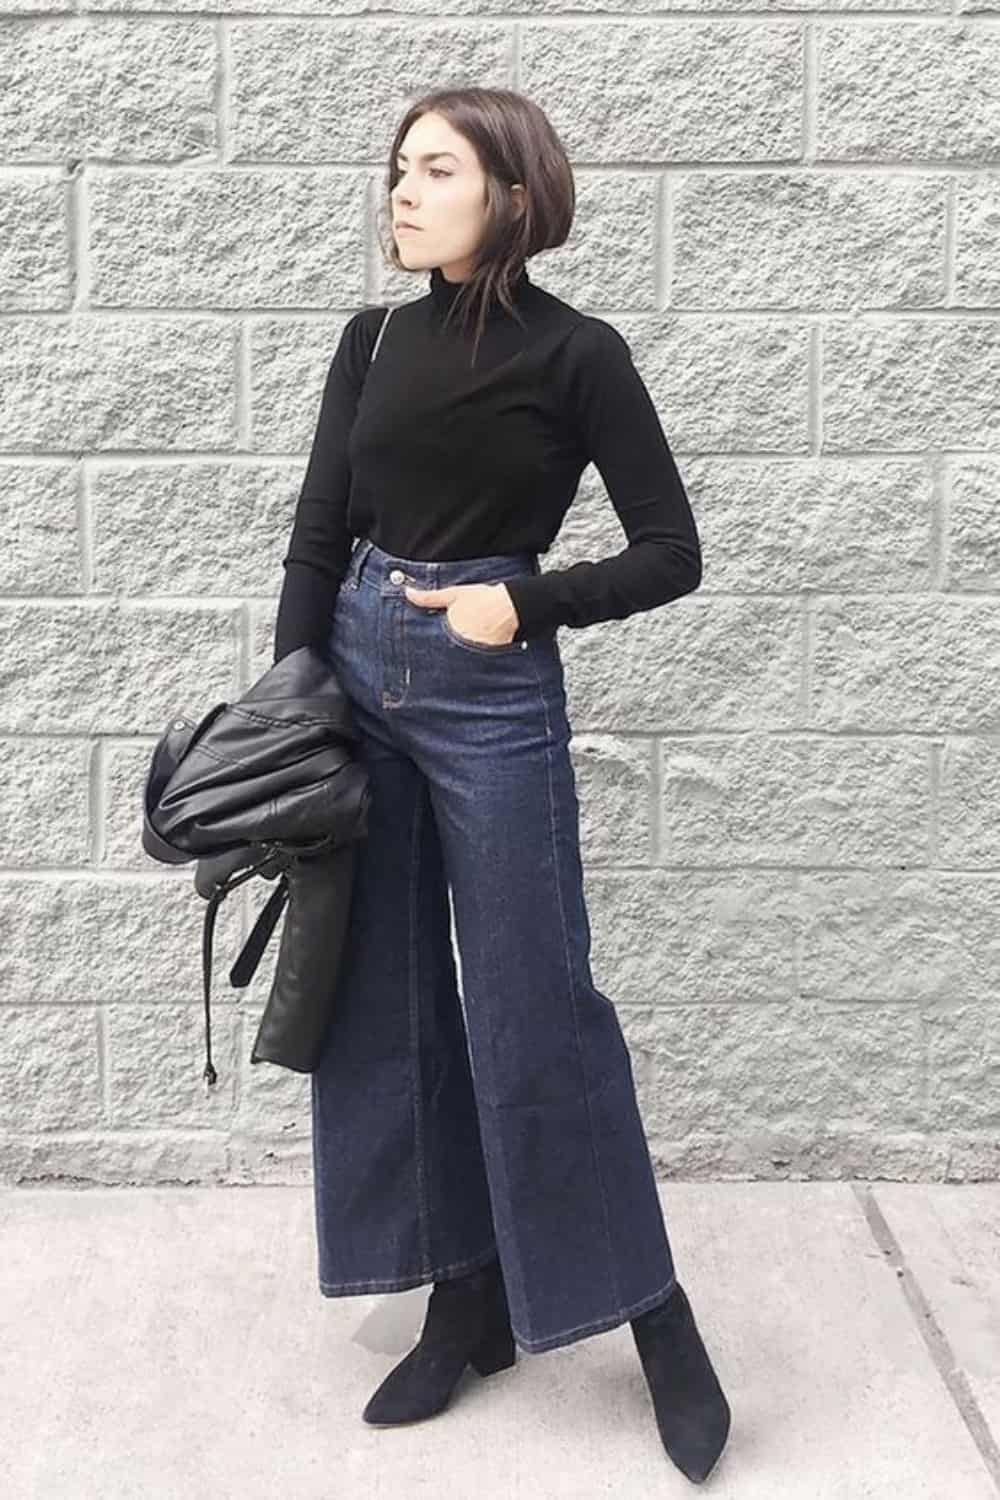 Black Ankle Boots with Dark wash Wide Leg Jeans